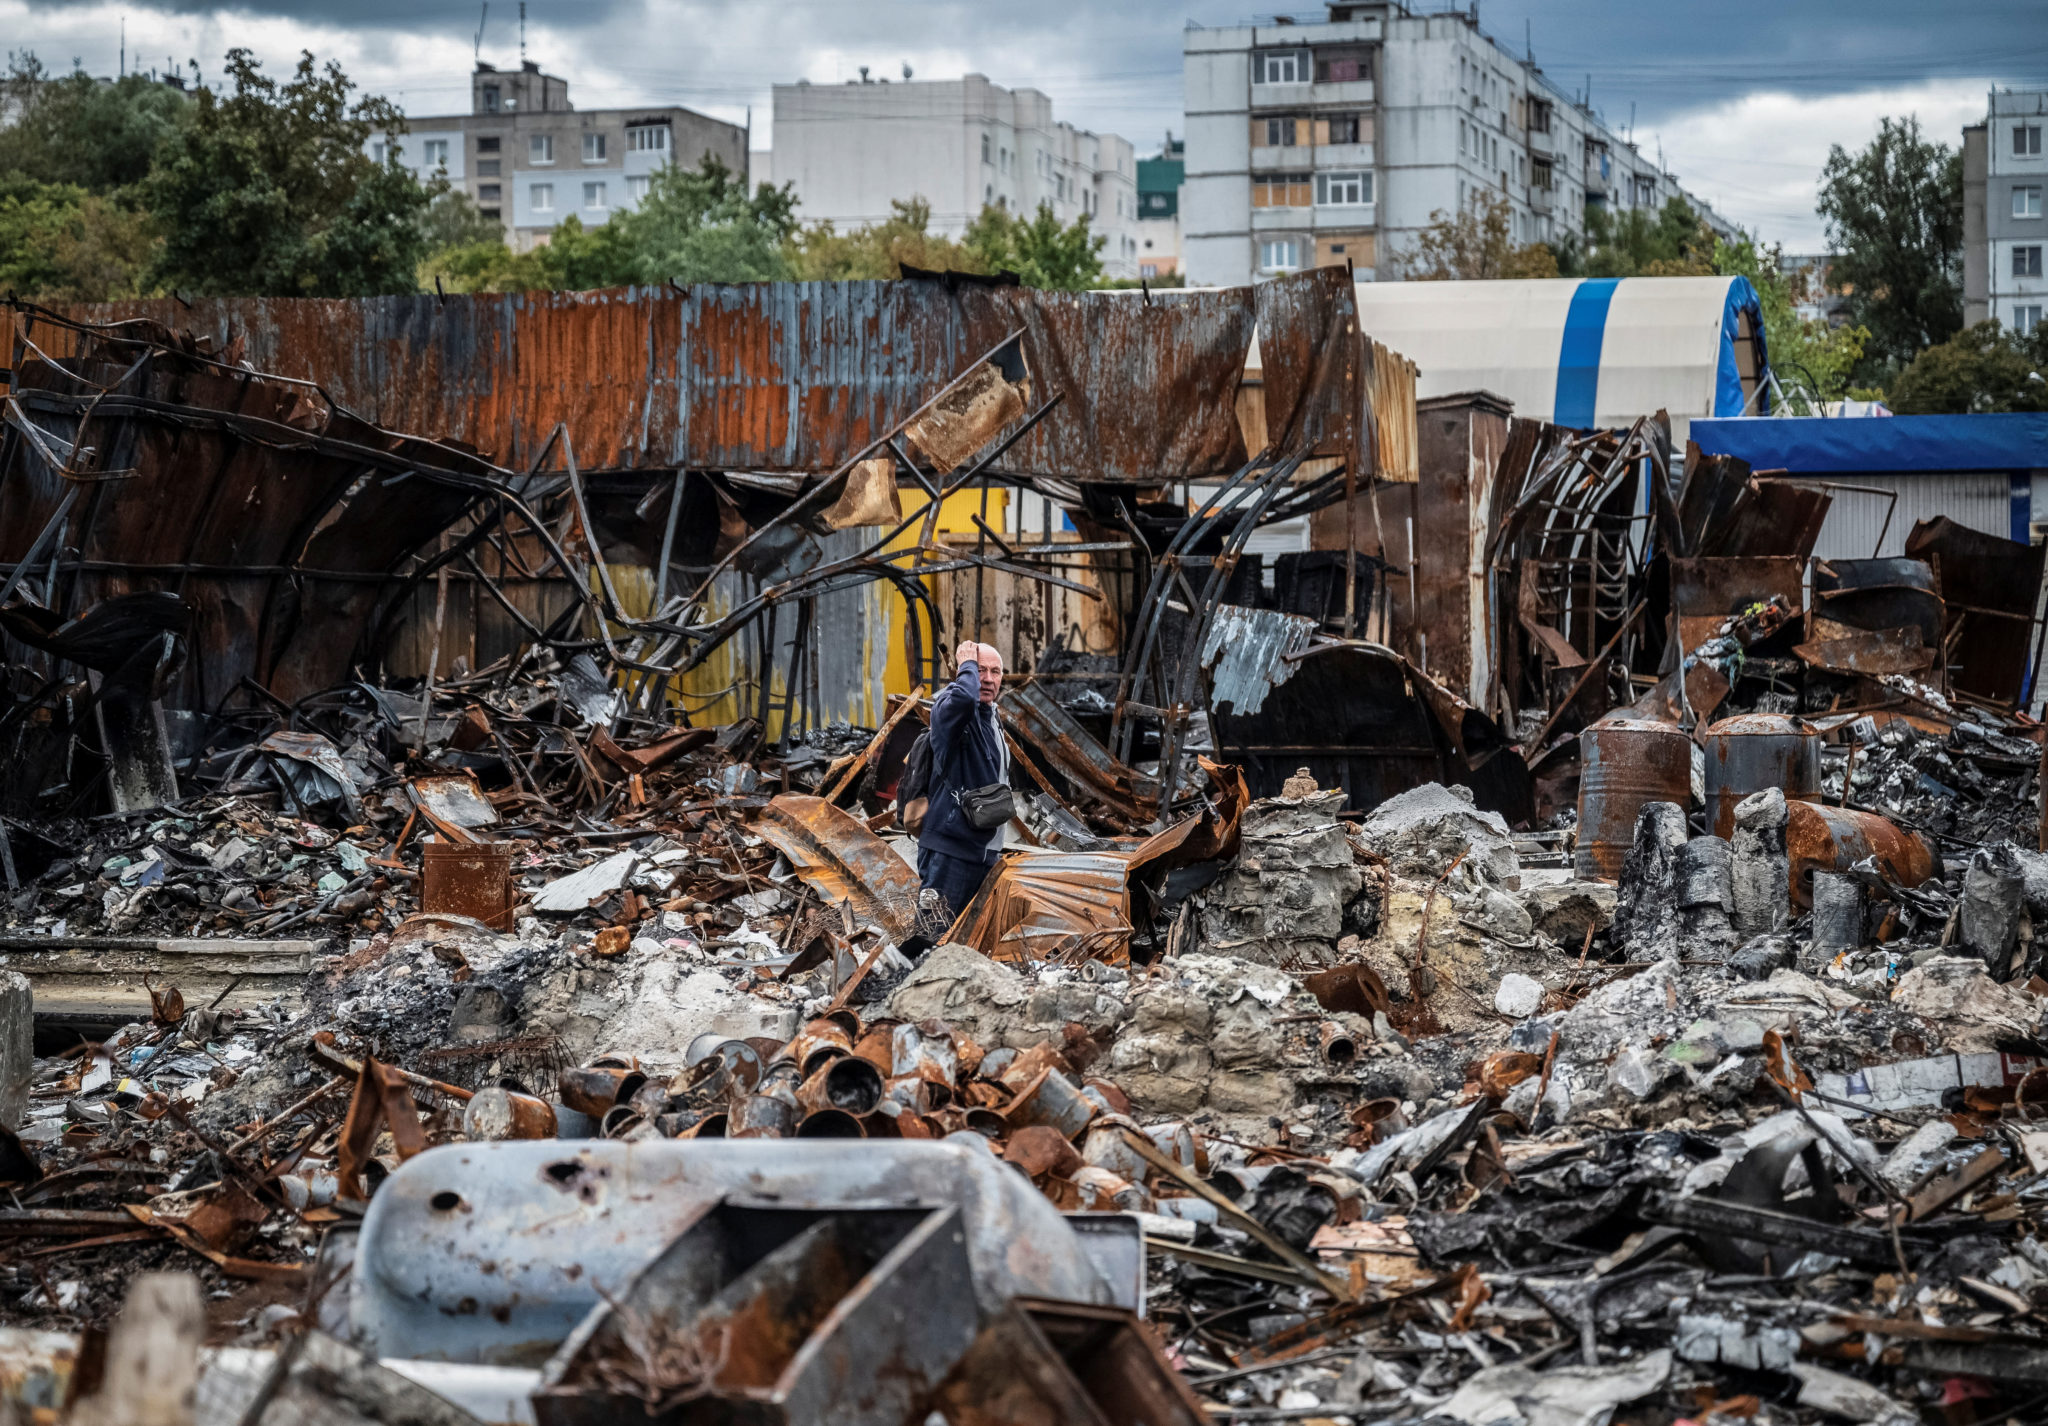 FILE PHOTO: A local resident walks by a street market destroyed by military strikes, as Russia's invasion of Ukraine continues, in Saltivka, one of the most damaged residential areas of Kharkiv, Ukraine September 6, 2022. REUTERS/Viacheslav Ratynskyi